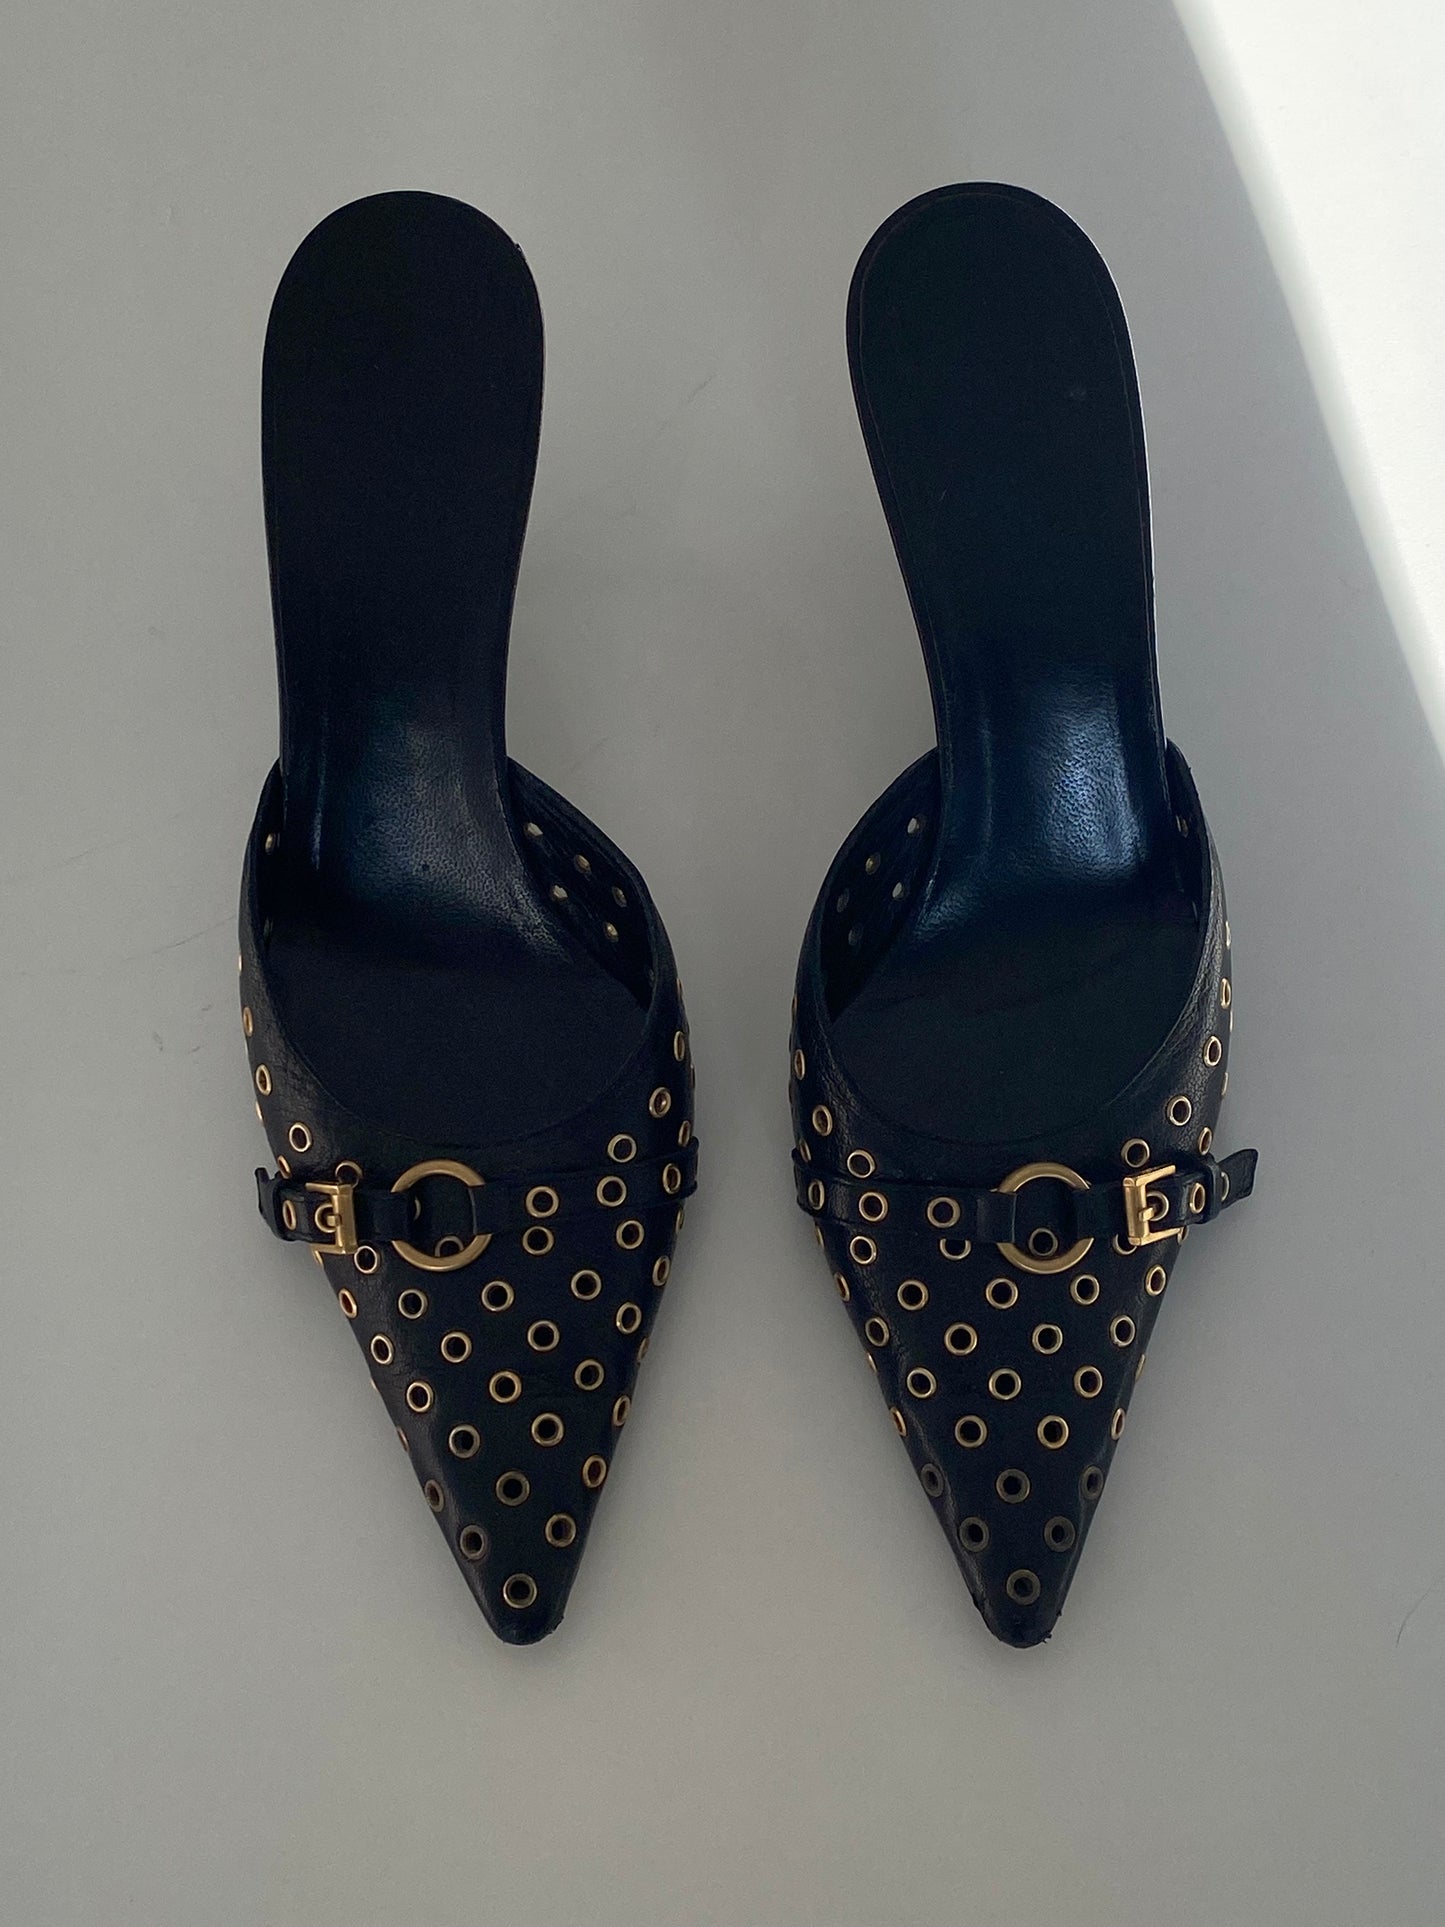 Gucci Perforated Slip On Heels